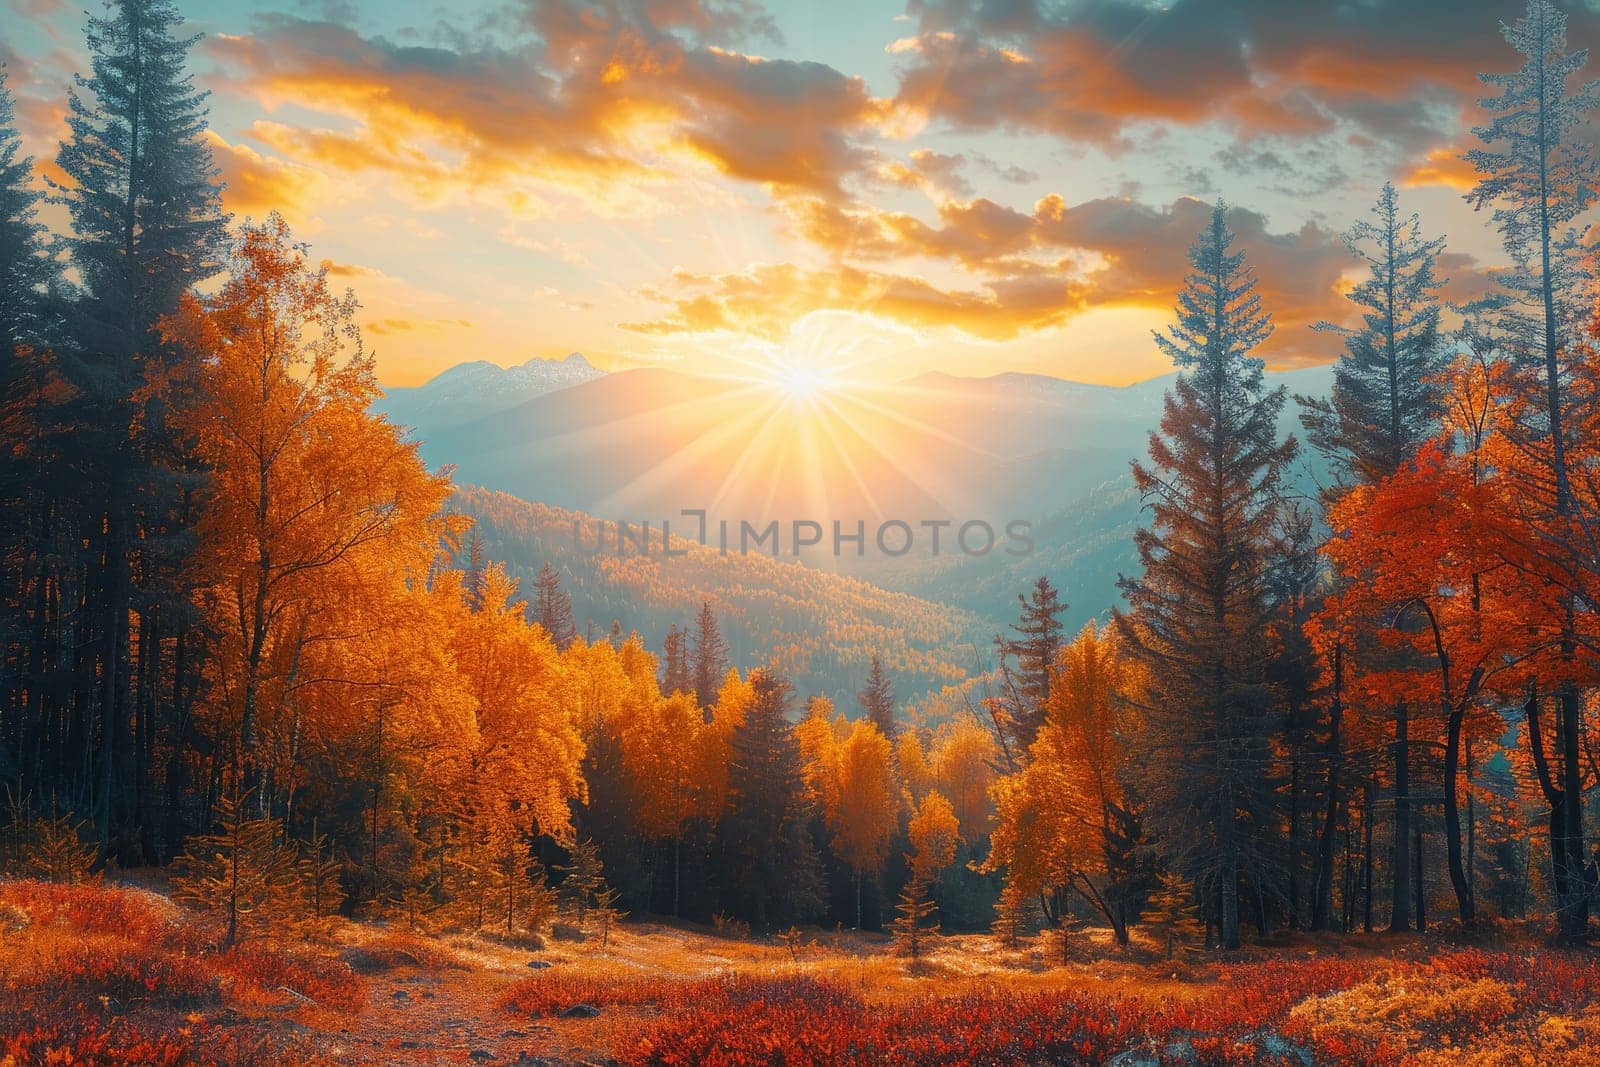 A beautiful autumn day with a bright sun shining through the trees. The sun is shining on the mountains in the background, creating a warm and peaceful atmosphere. The trees are full of leaves